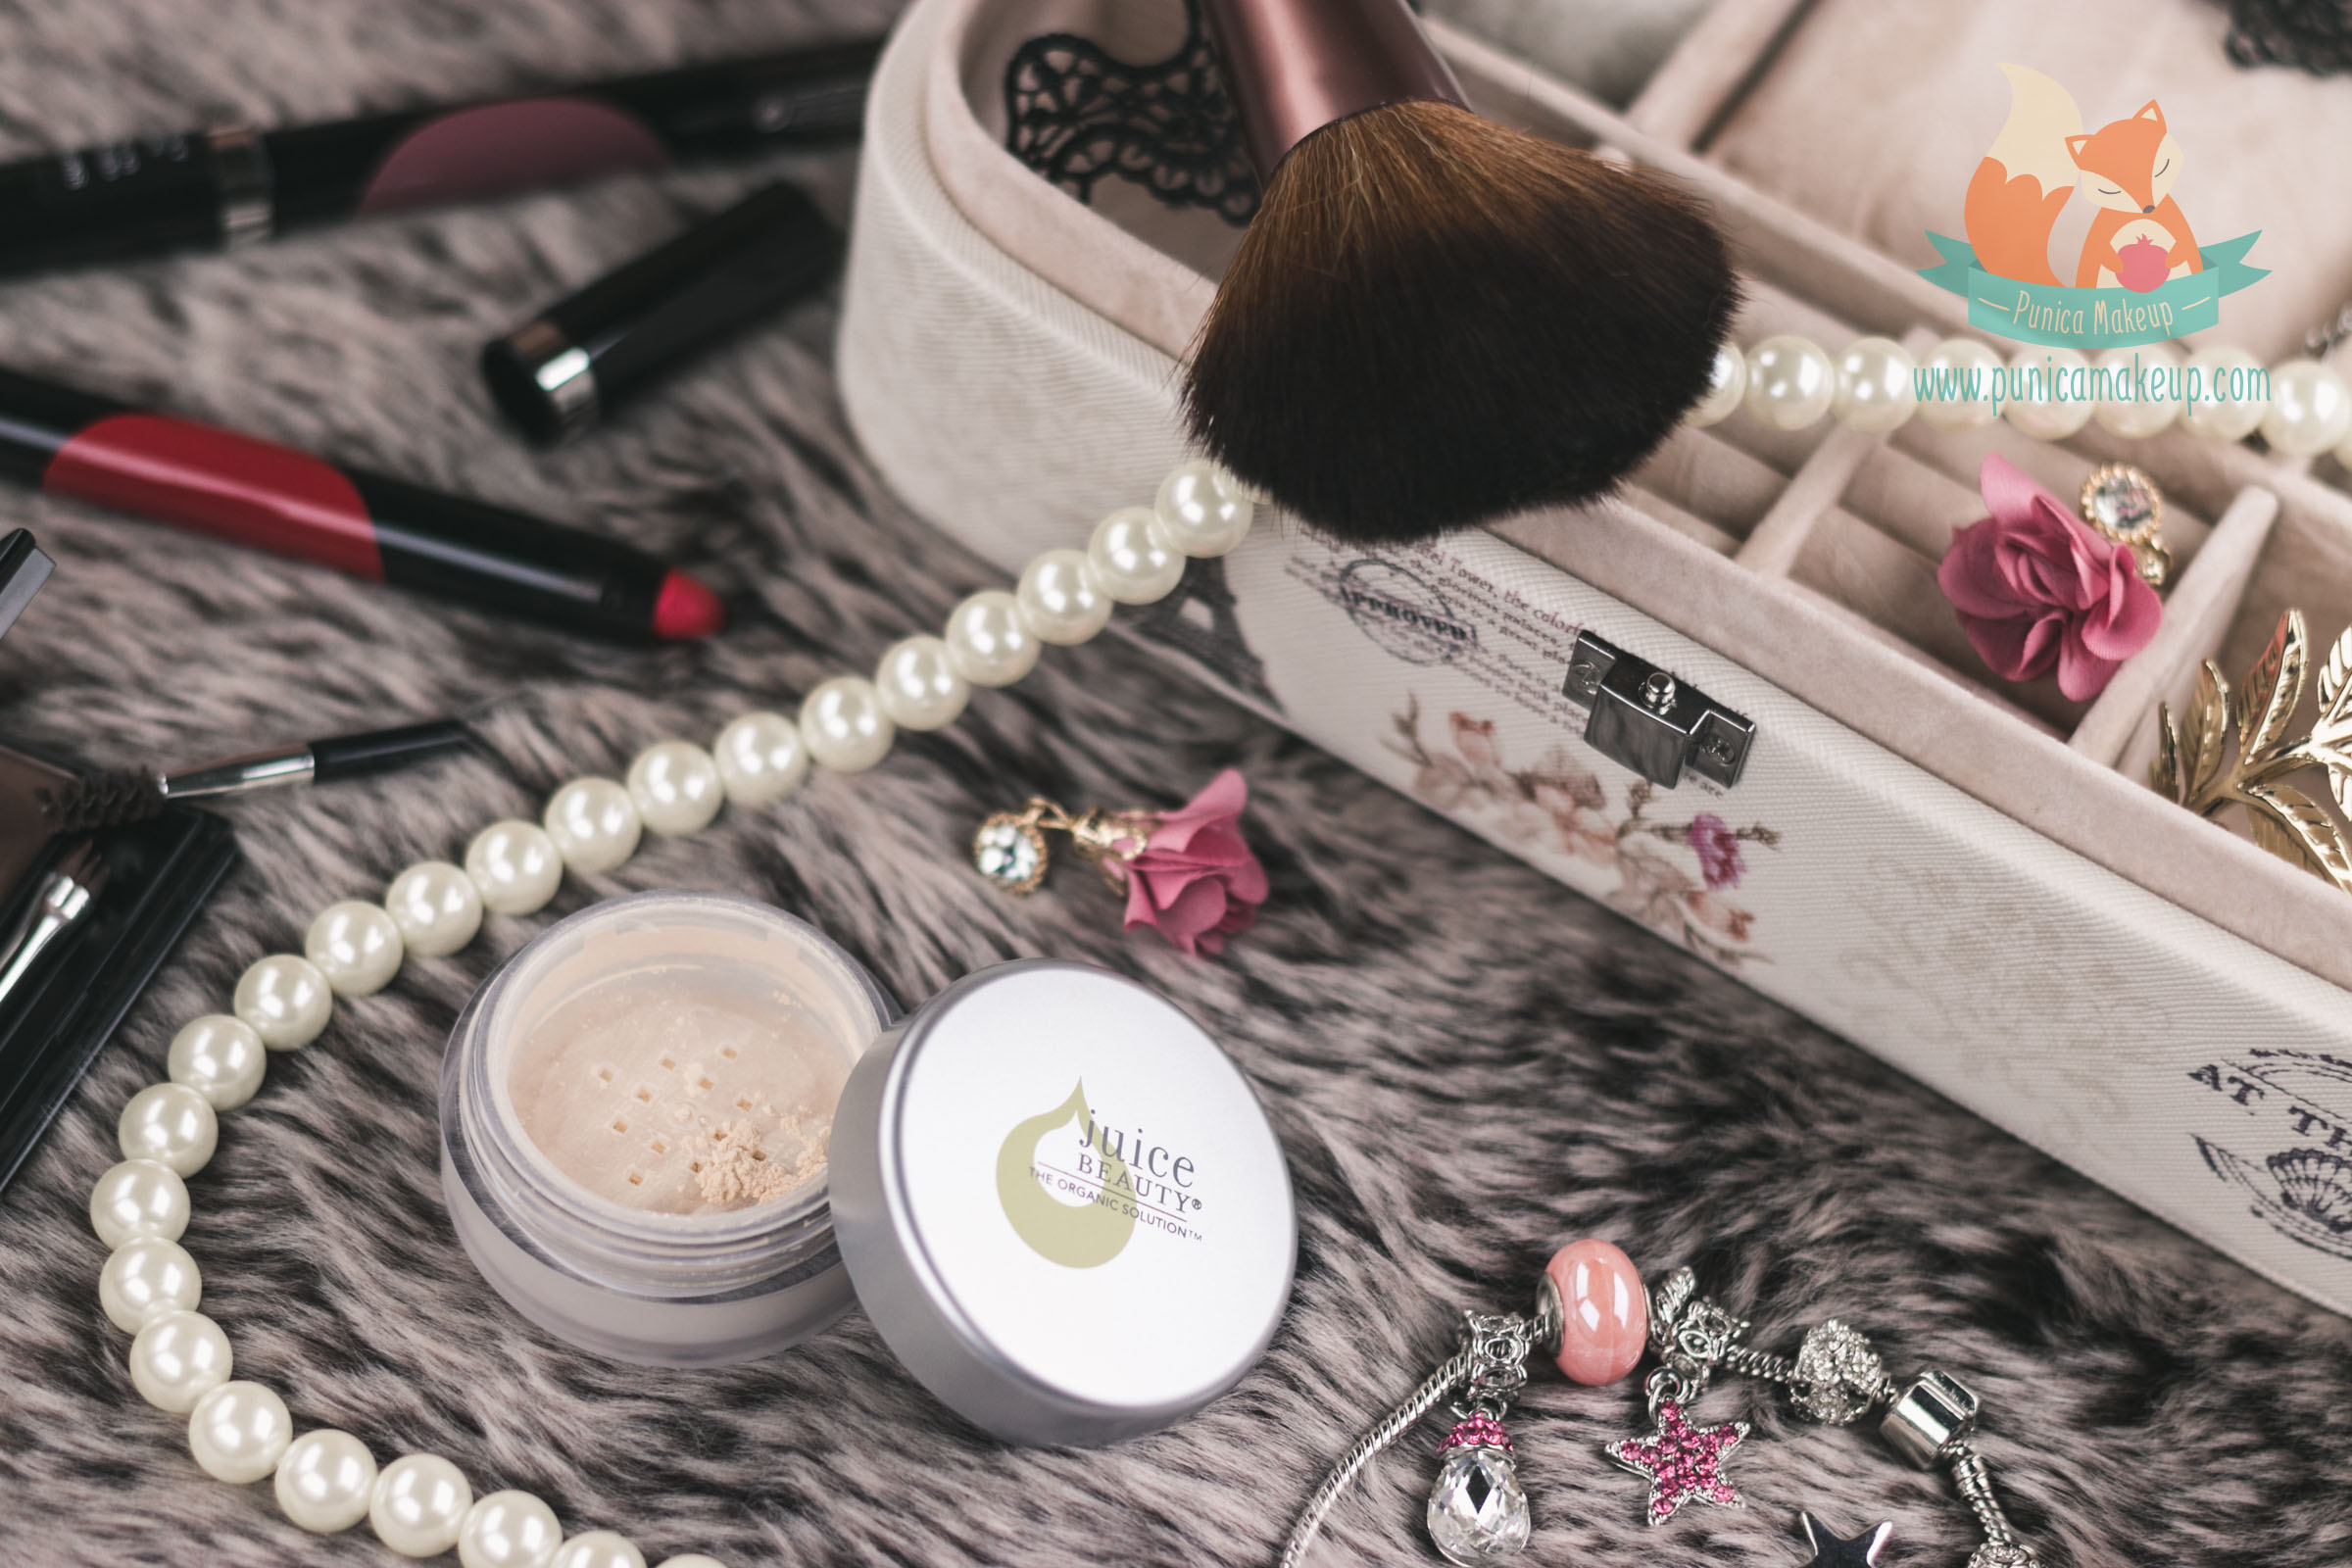 Review: Juice Beauty – Blemish Clearing Powder